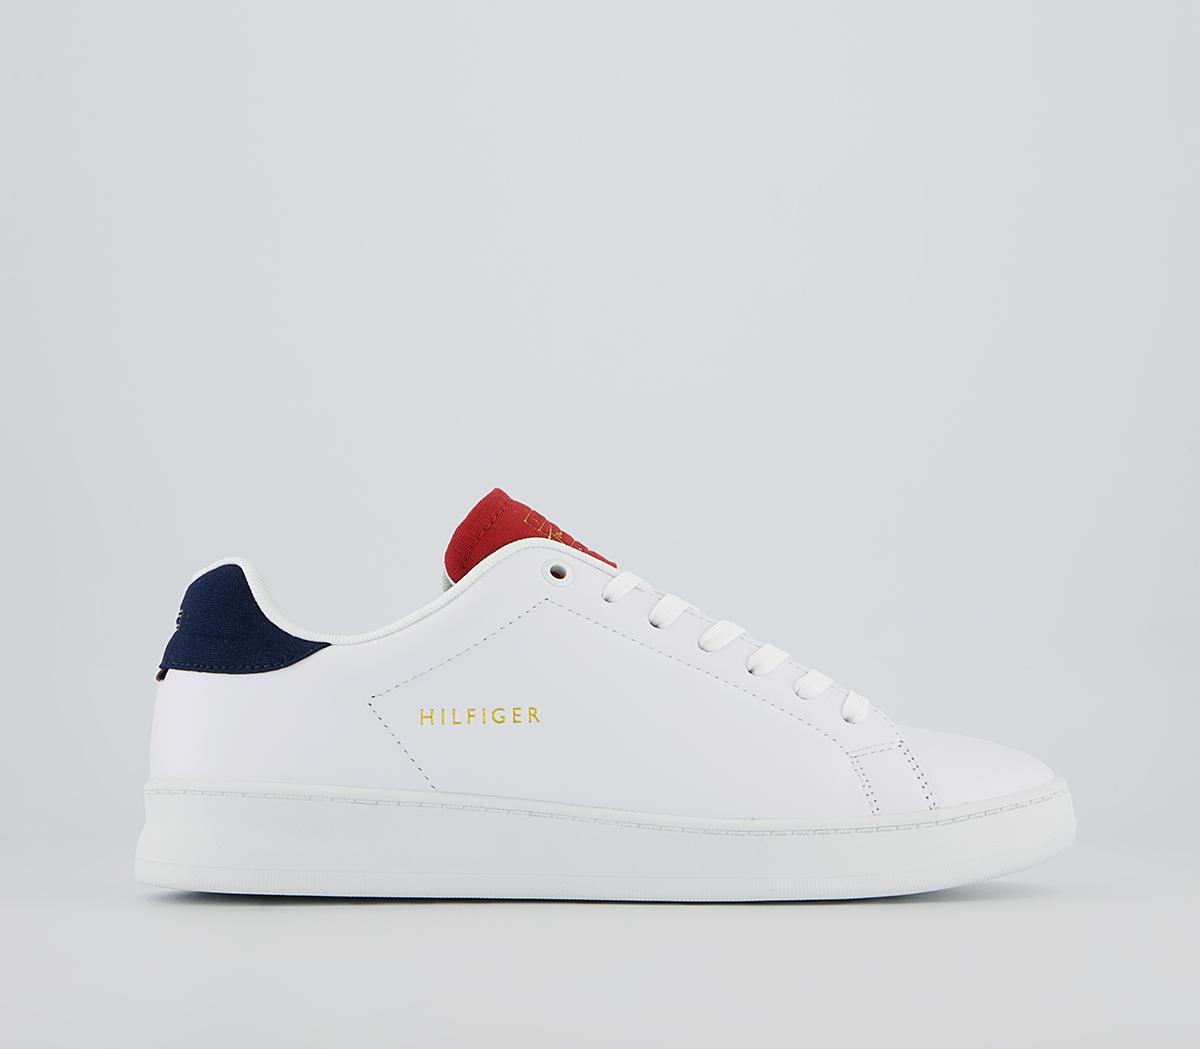 Tommy Hilfiger Red Casual Shoes - Buy Tommy Hilfiger Red Casual